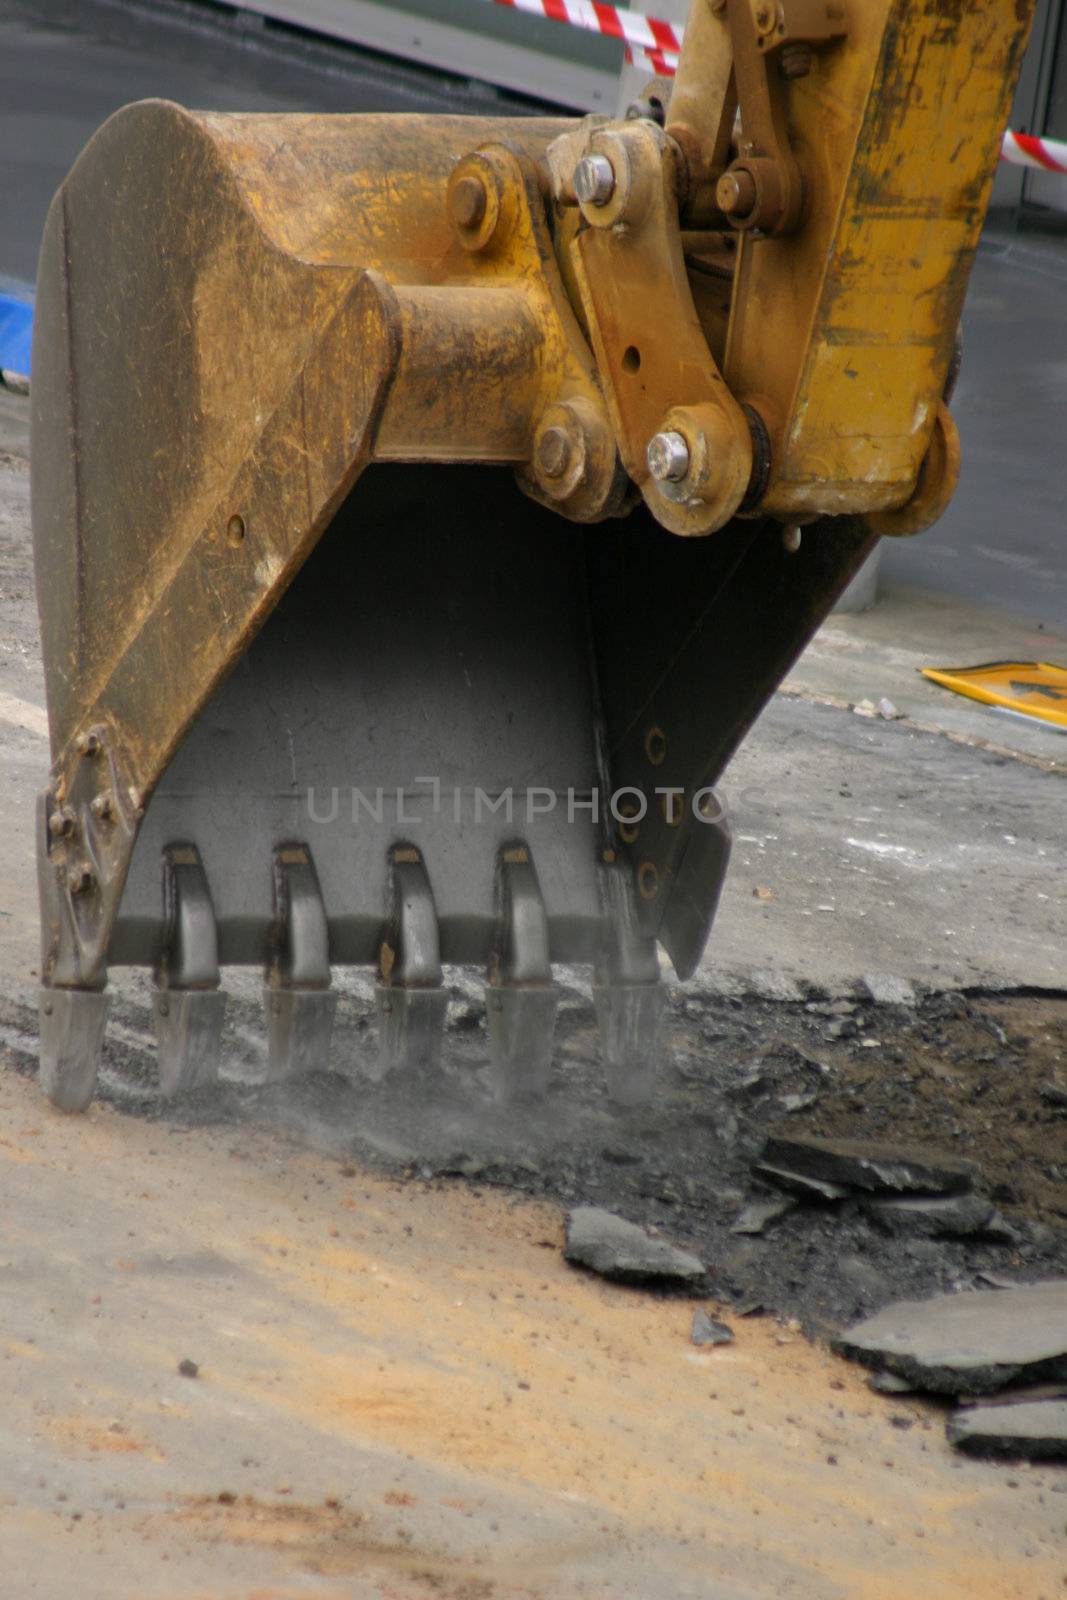 Large steel teeth of the excavator vibrate and shake noisily as they begin to dig up an existing road.